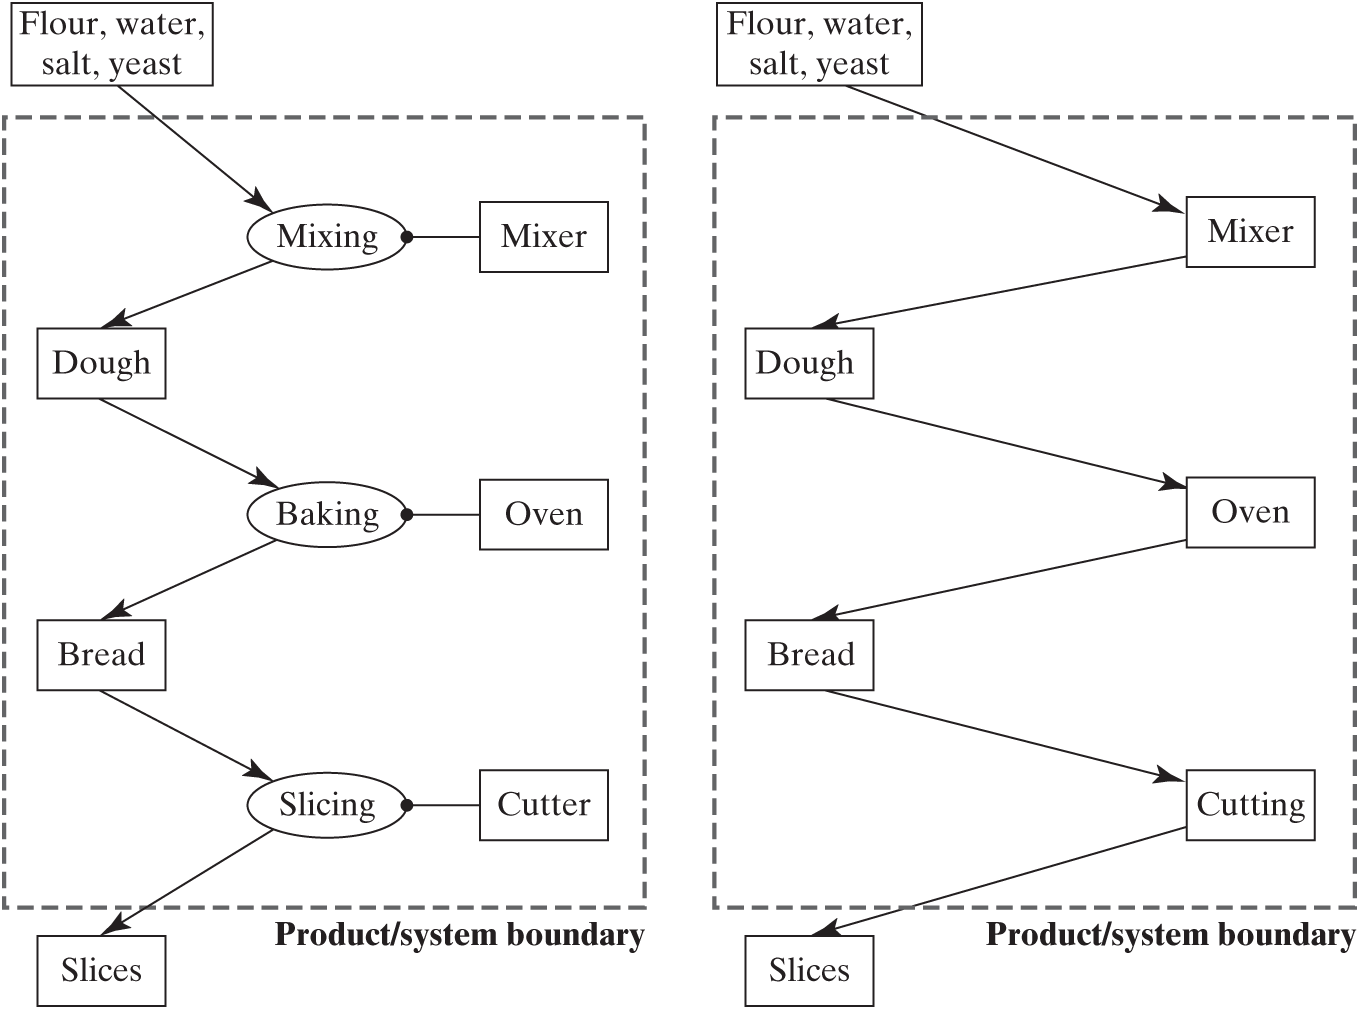 Two diagrams of simple system architecture of sliced bread making. Each part denoted with labeled rectangles and ovals.